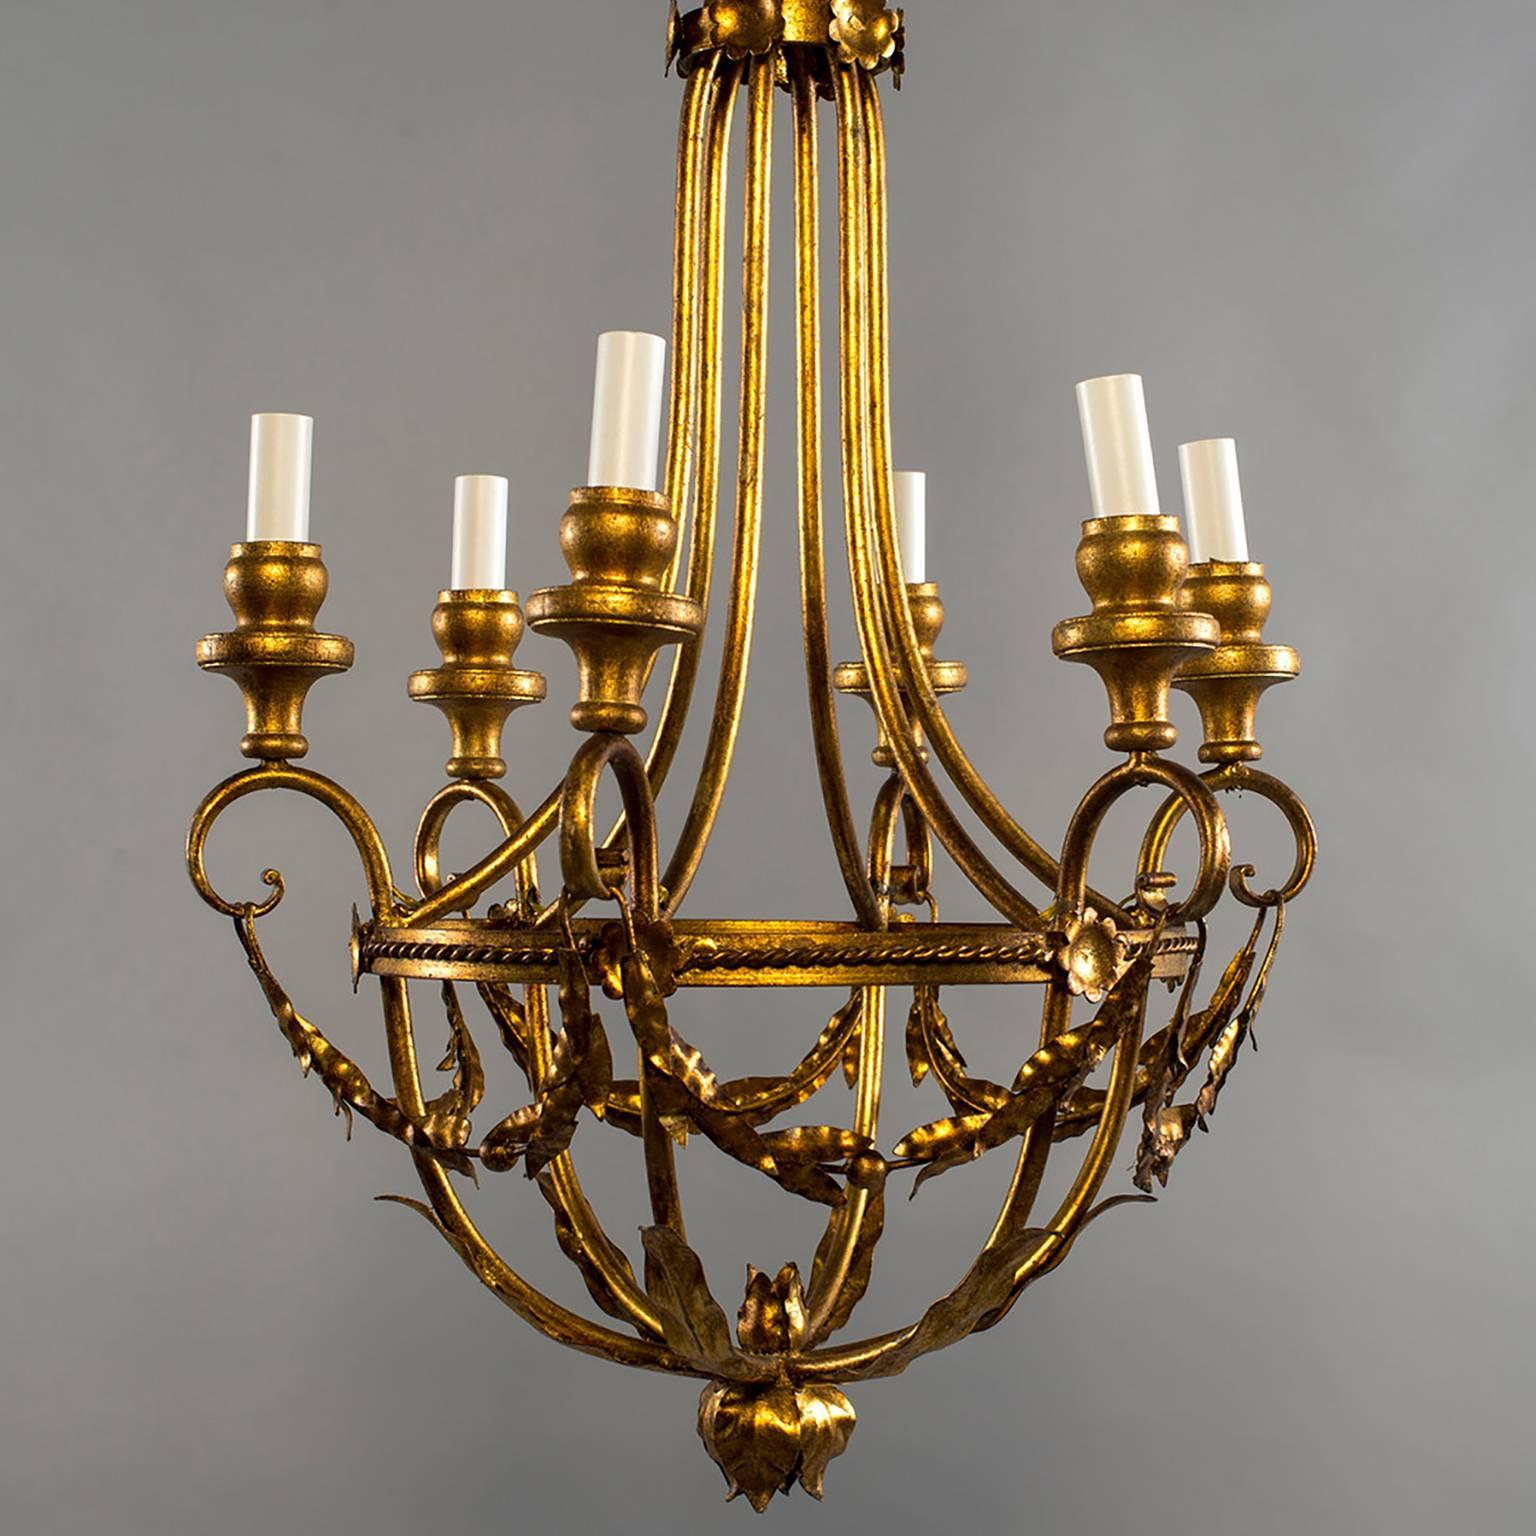 French six-light metal chandelier has basket shape, gilded finish, wooden bobeches and candle style lights. Original ceiling canopy included. New wiring for US electrical standards.
 